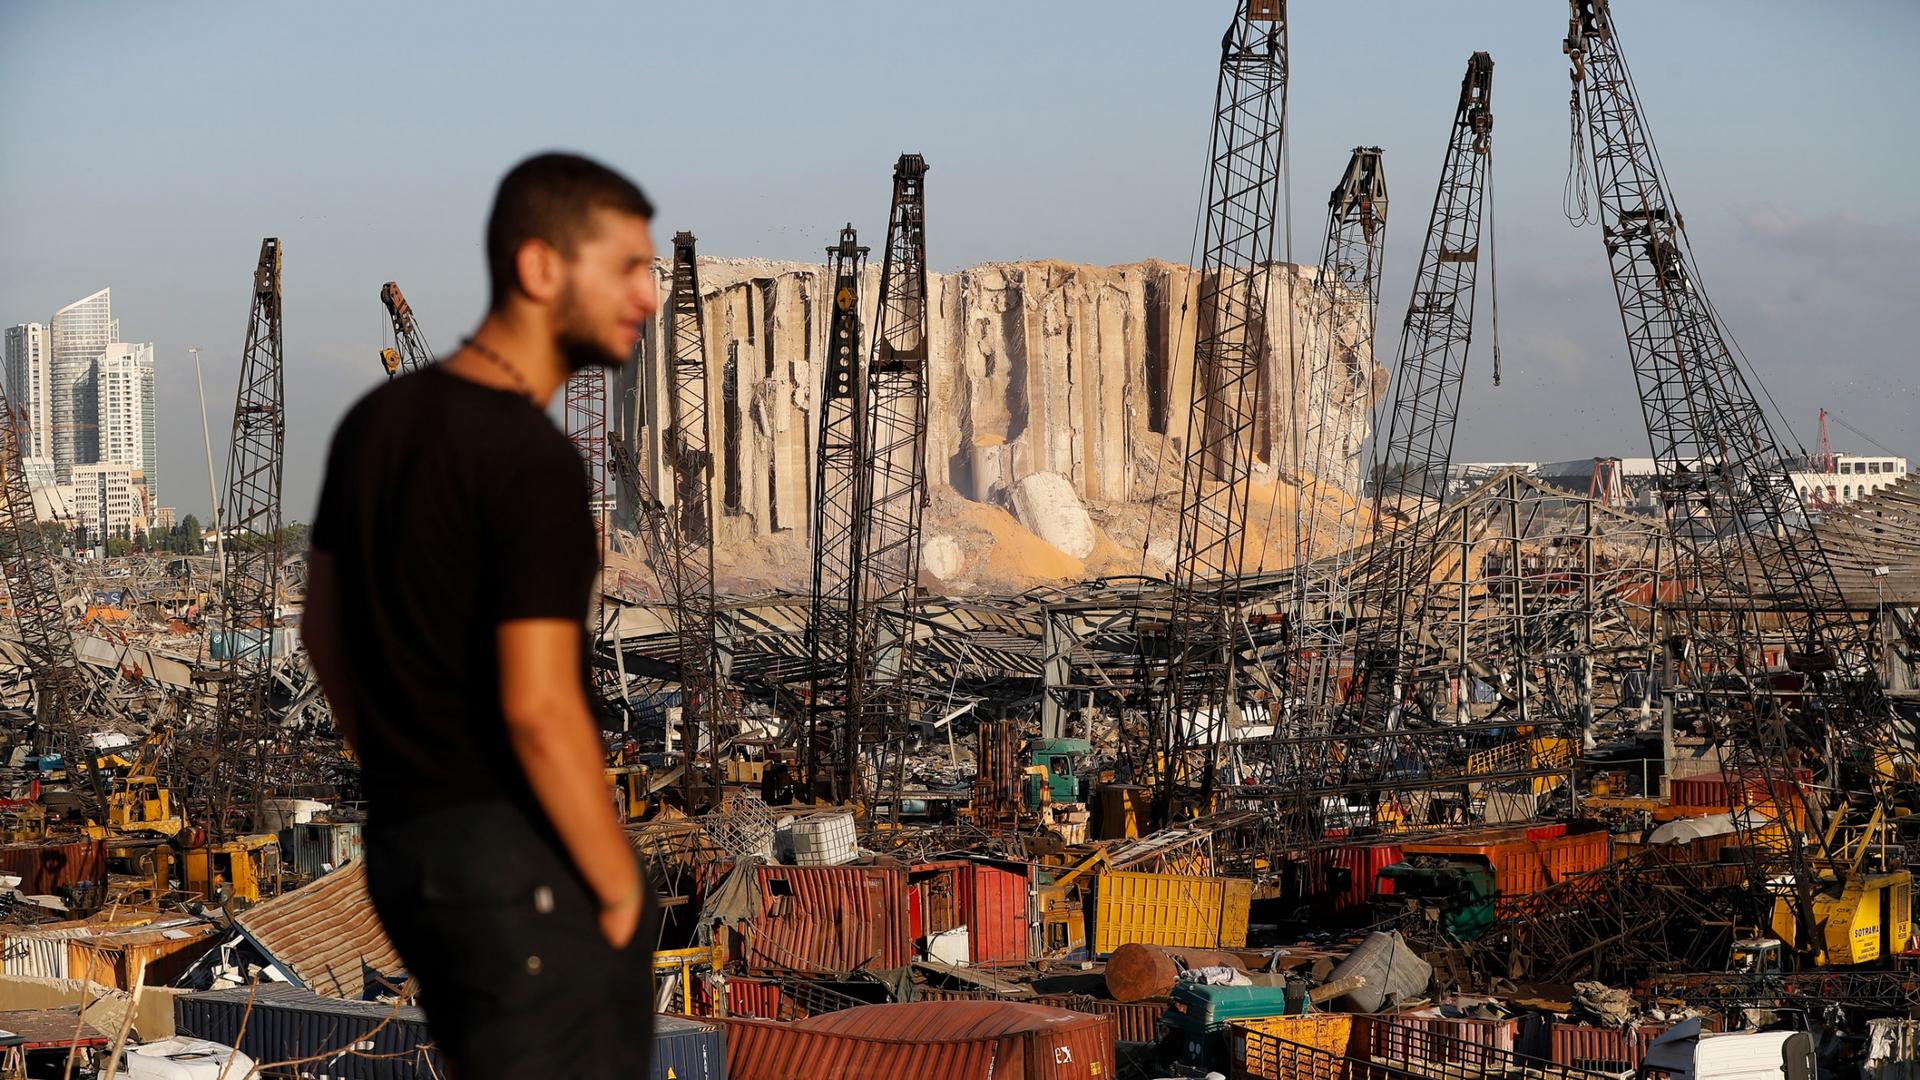 The port of Beirut is show with shipping containers scattered and damaged in the distance with a man in a dark t-shirt in the nearground.